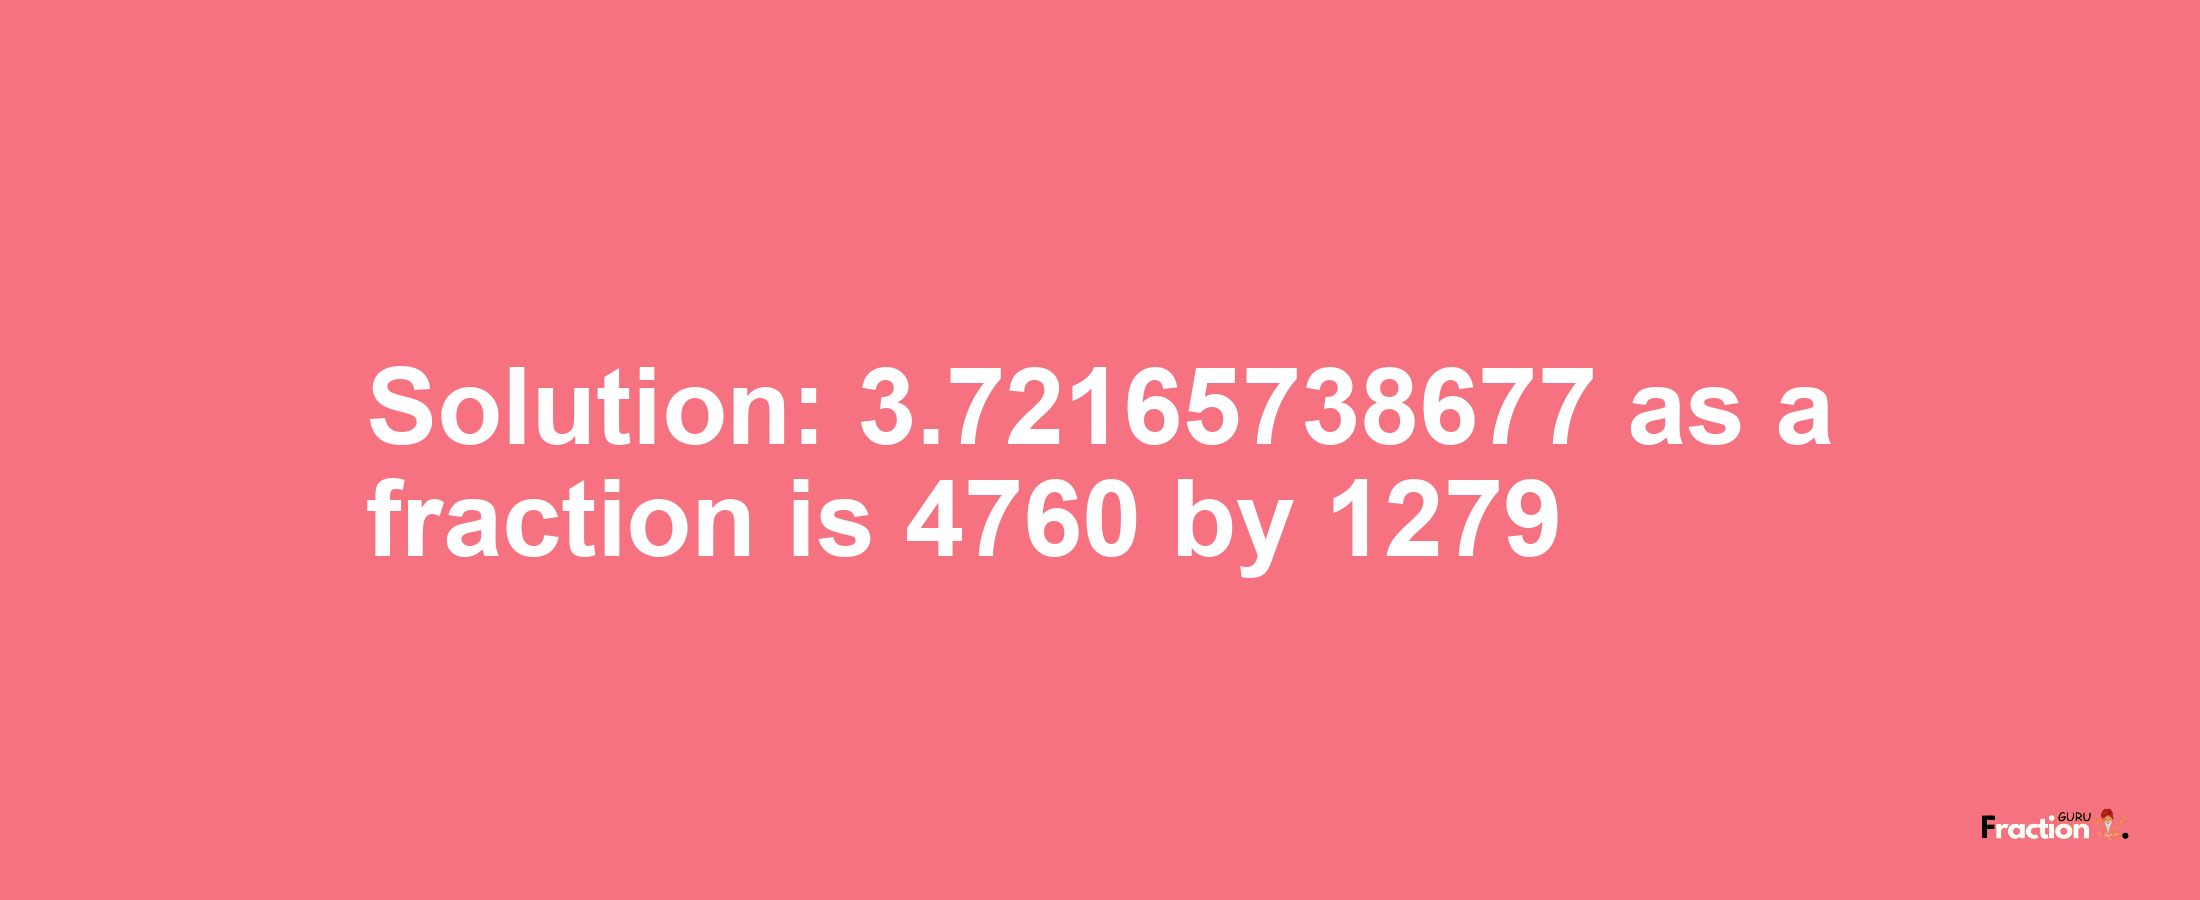 Solution:3.72165738677 as a fraction is 4760/1279